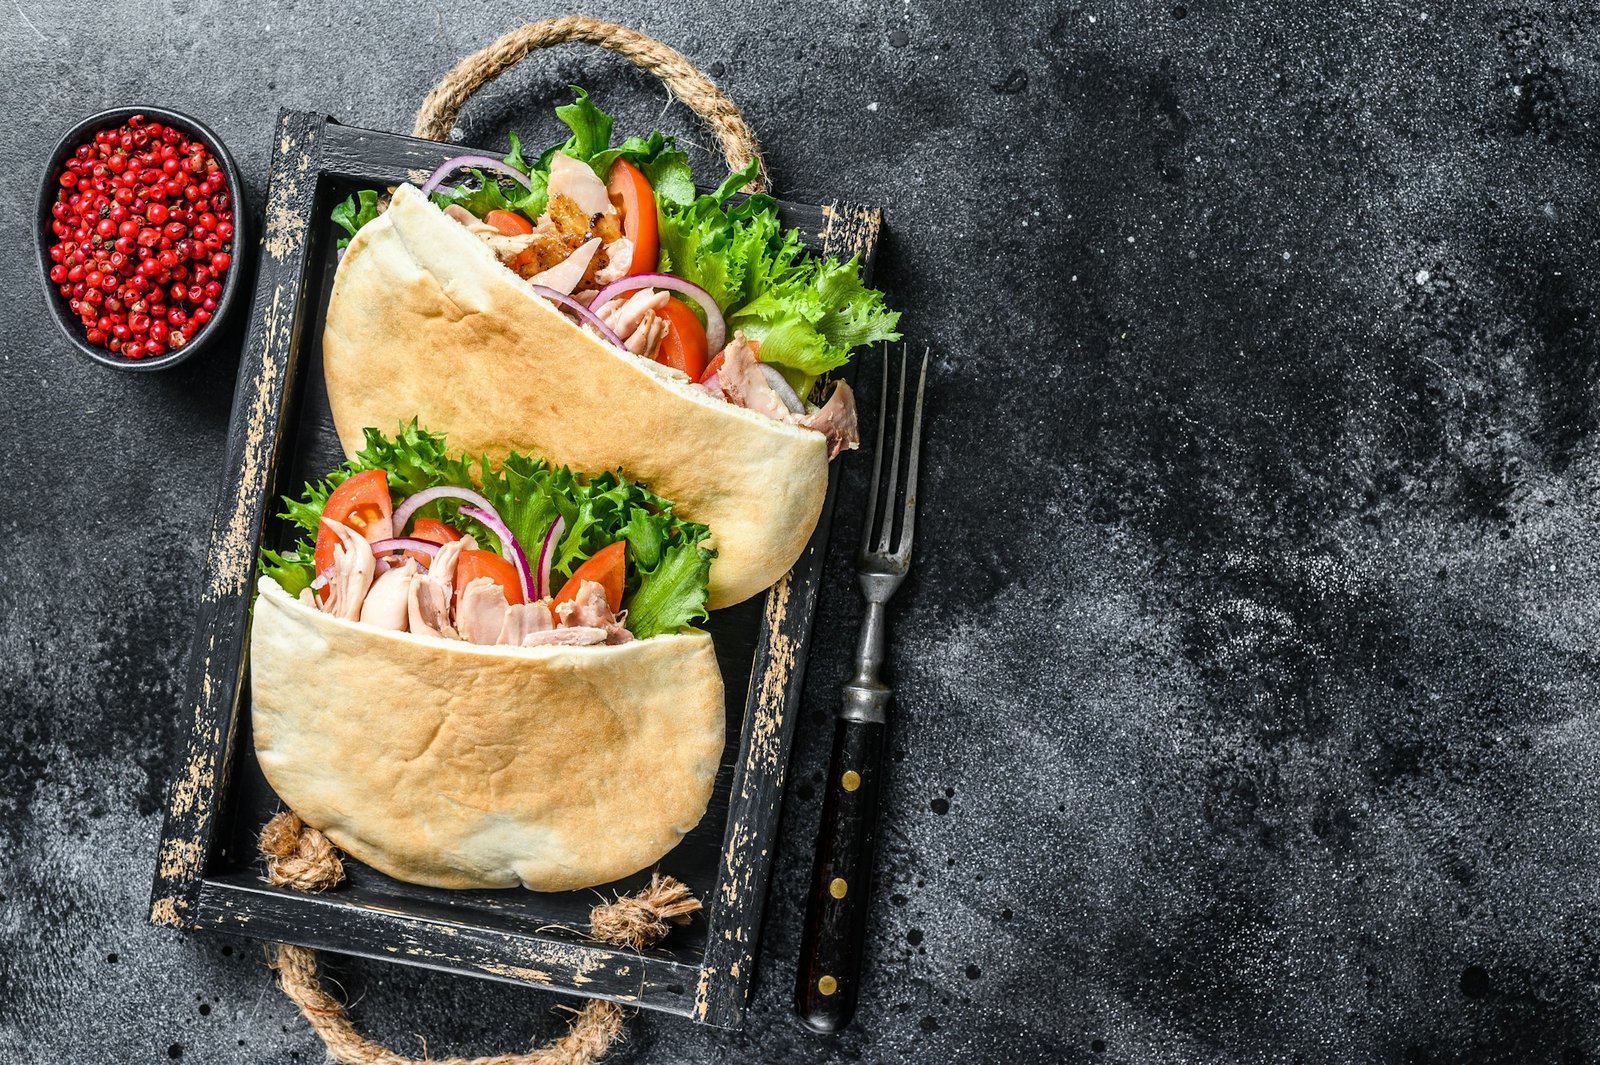 Doner kebab with grilled chicken meat and vegetables in pita bread on a wooden tray.